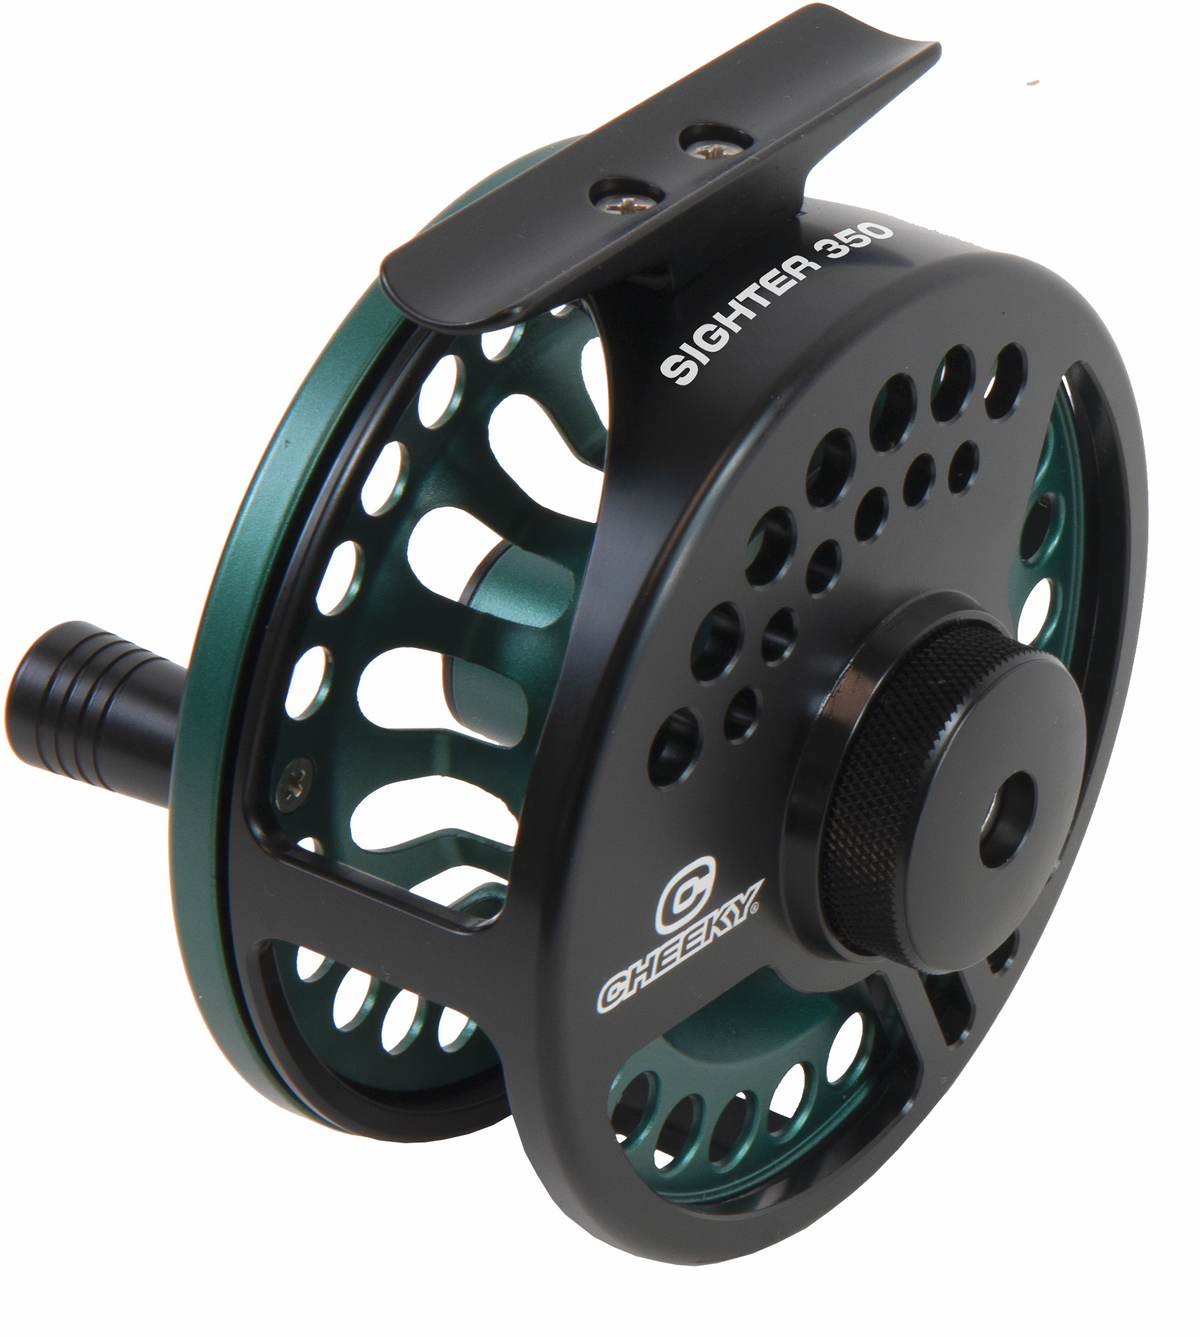 Fly Fisherman's Best New Euro Reel for 2022 - Fly Fisherman